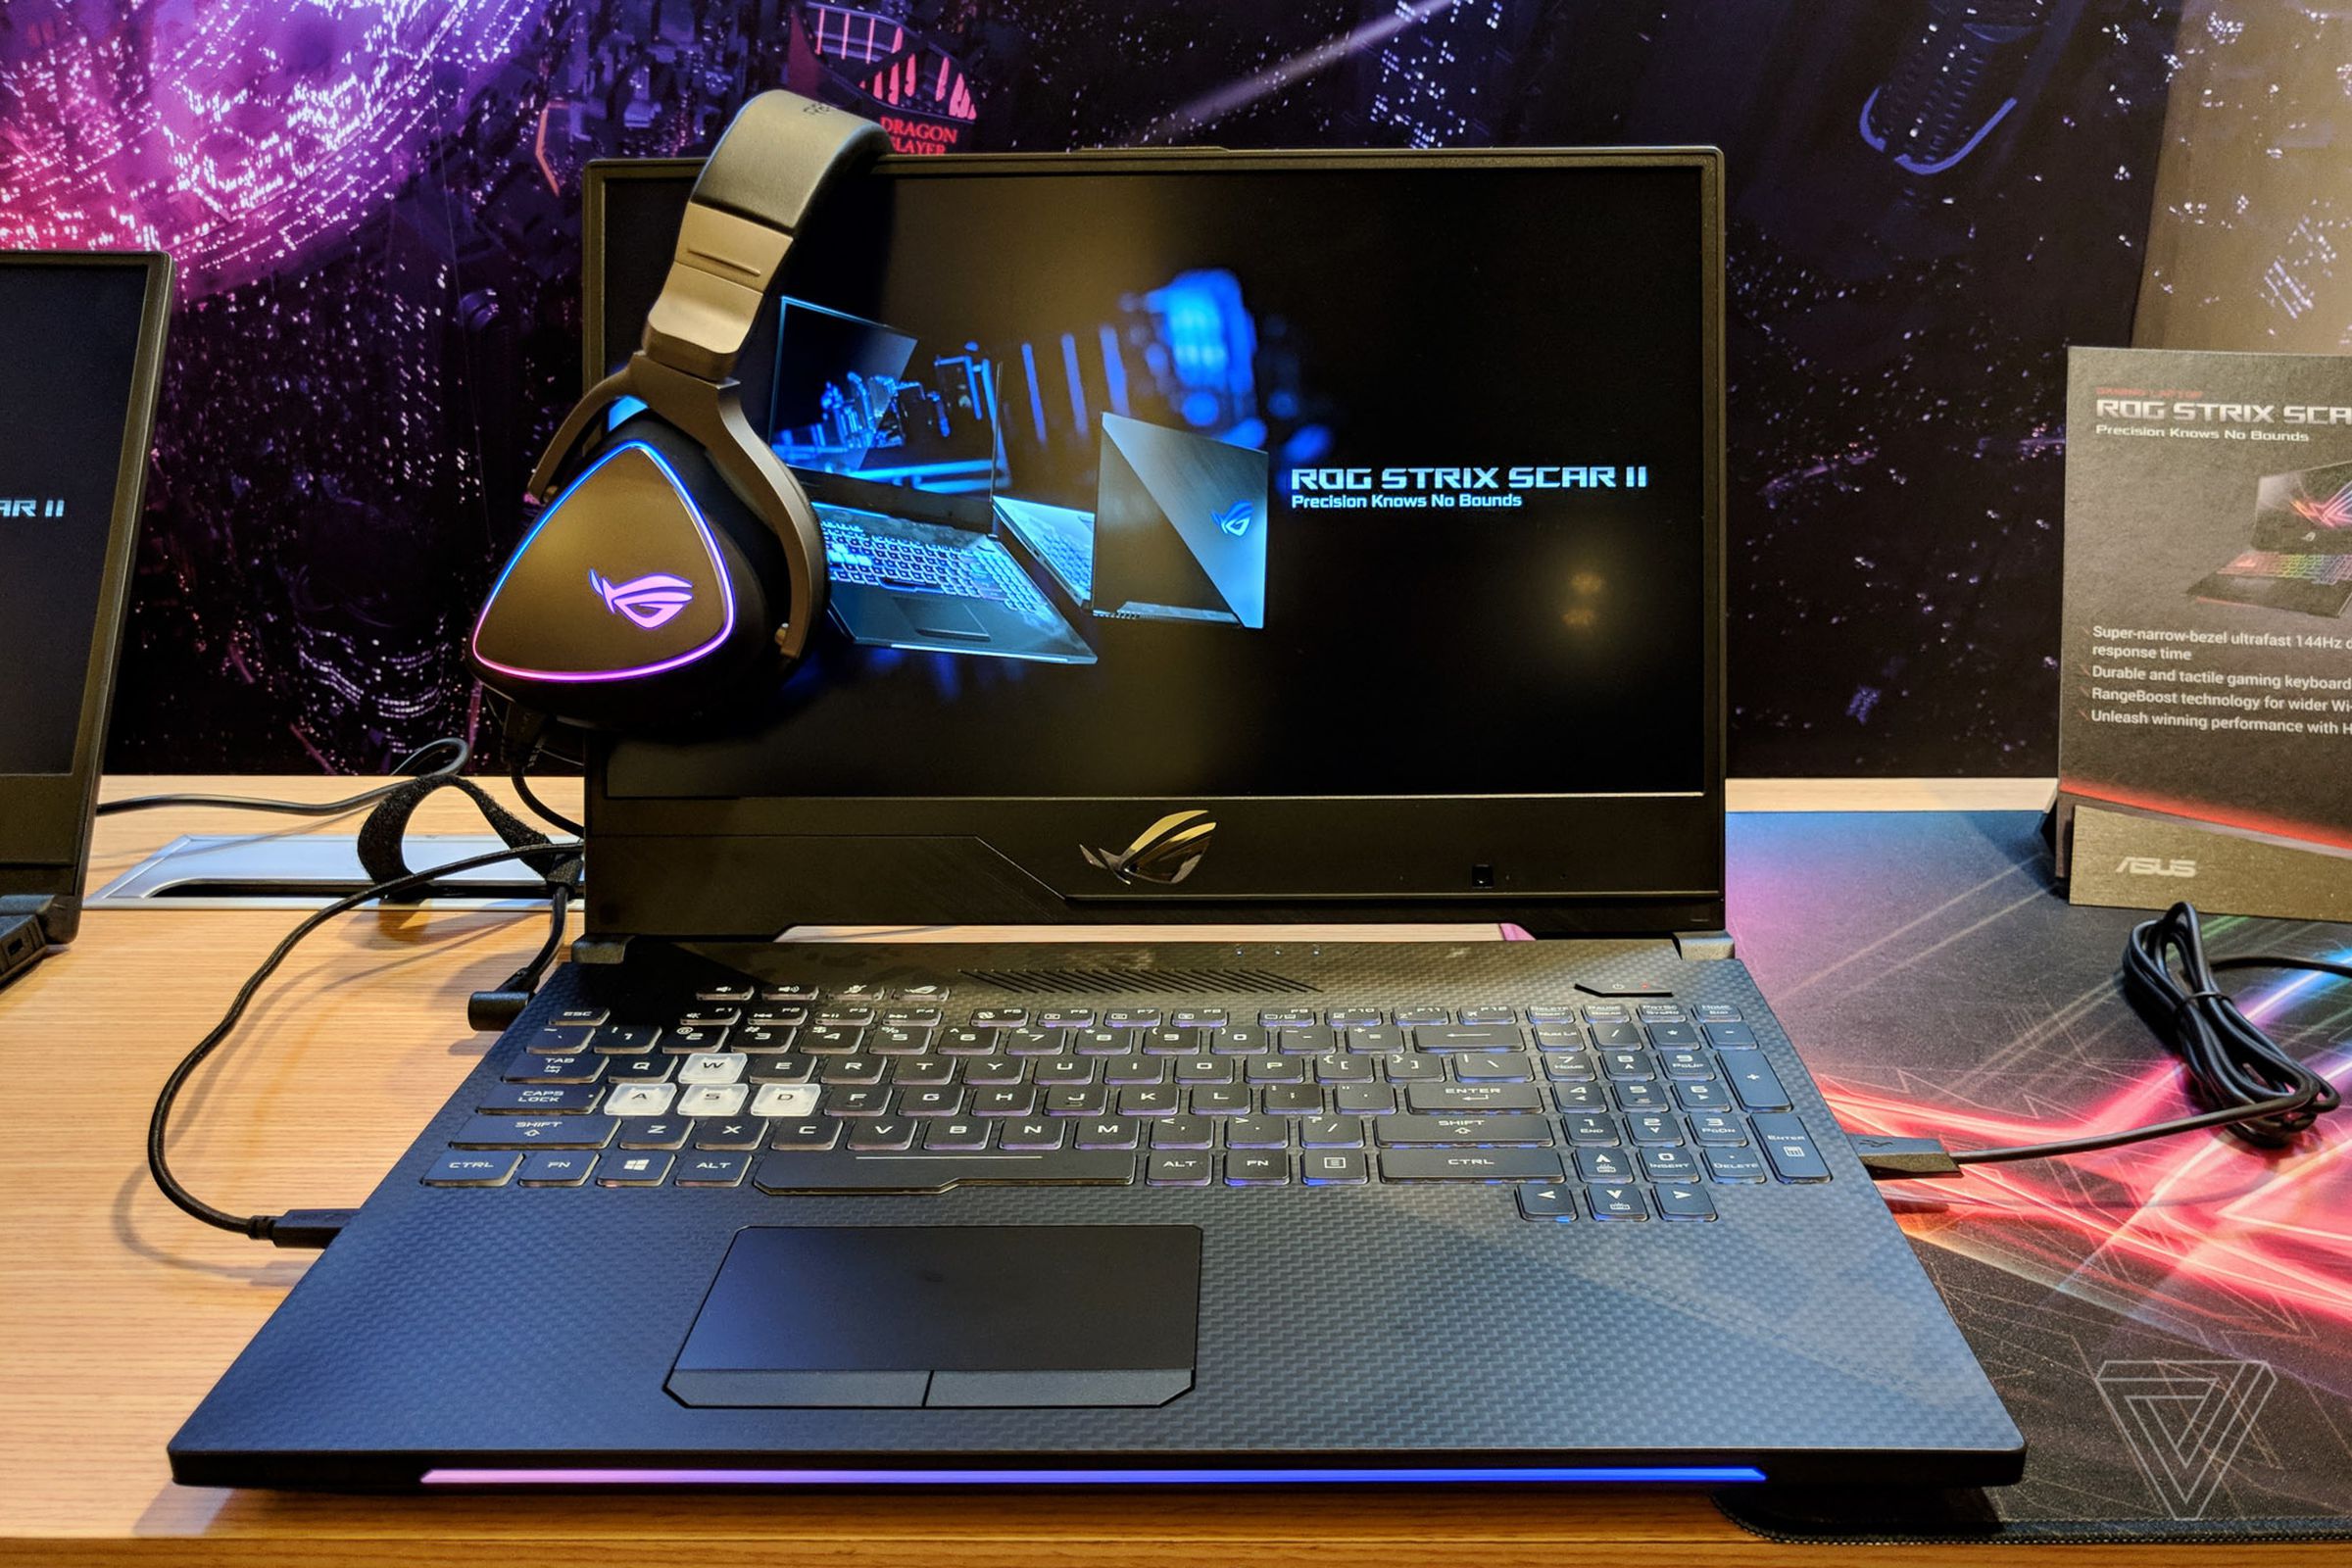 Asus ROG Delta Type-C on the Scar II laptop at Computex 2018